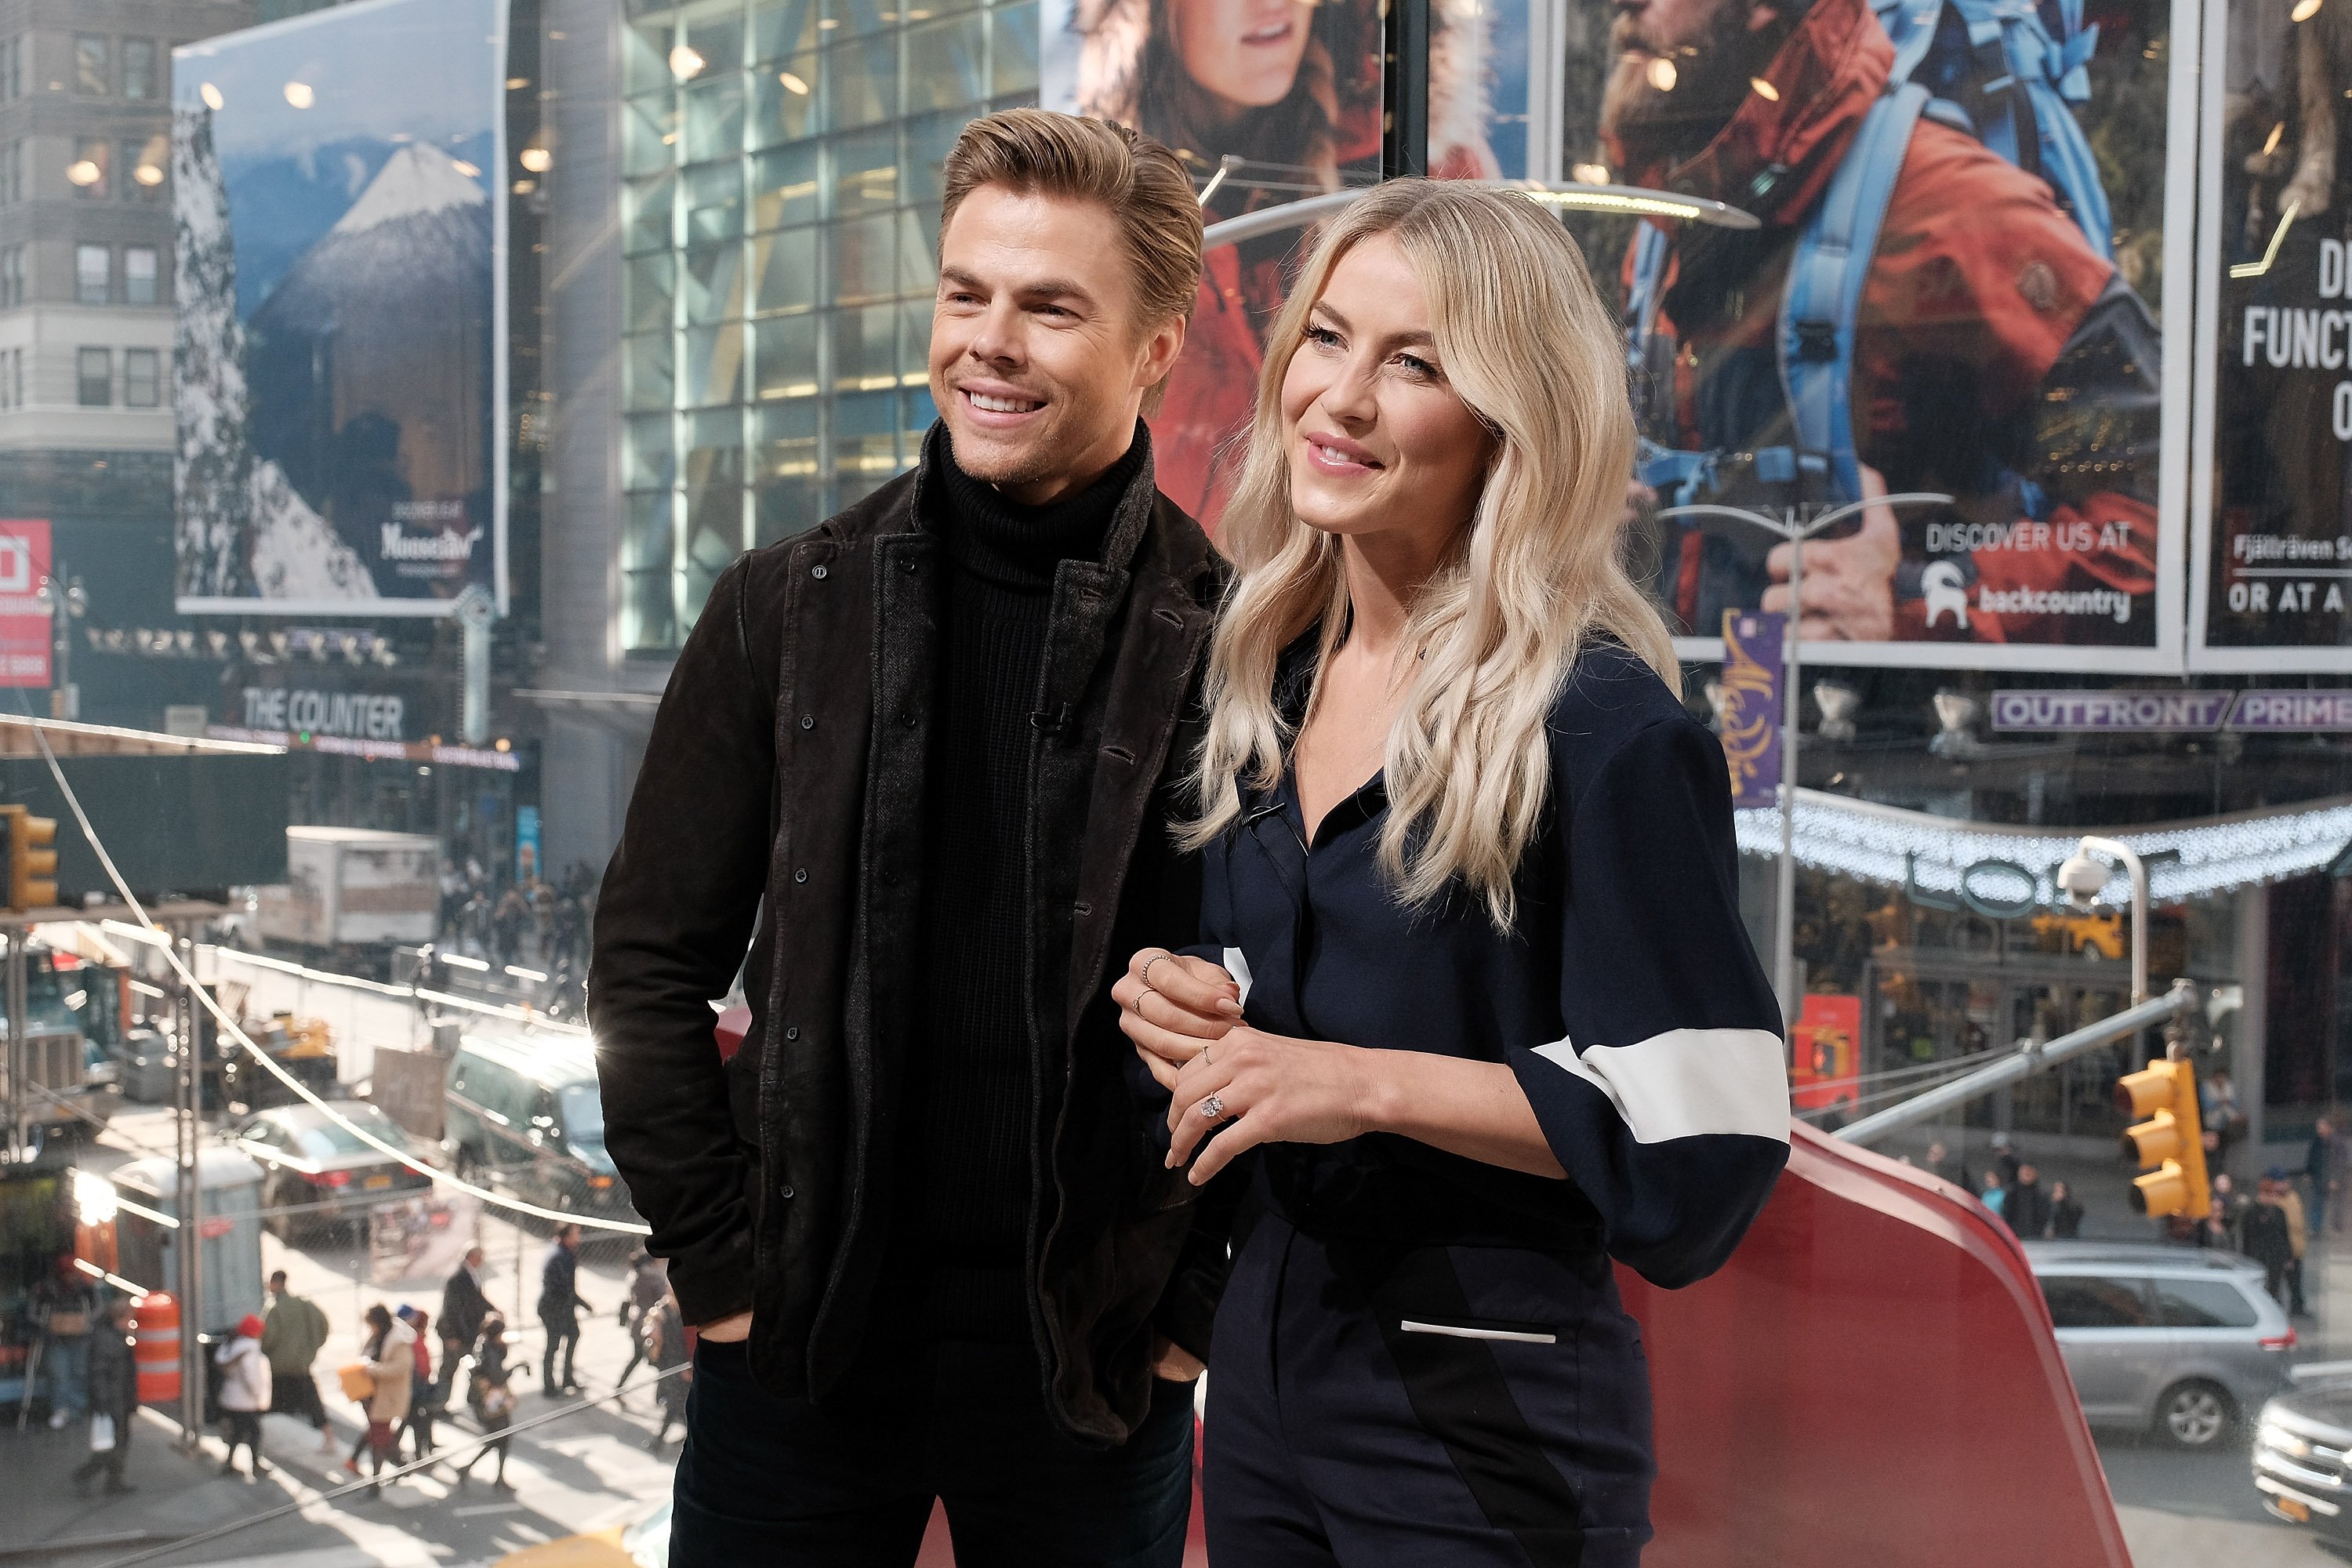 Derek Hough and Julianne Hough visit "Extra" in Times Square on December 13, 2016 | Photo: GettyImages